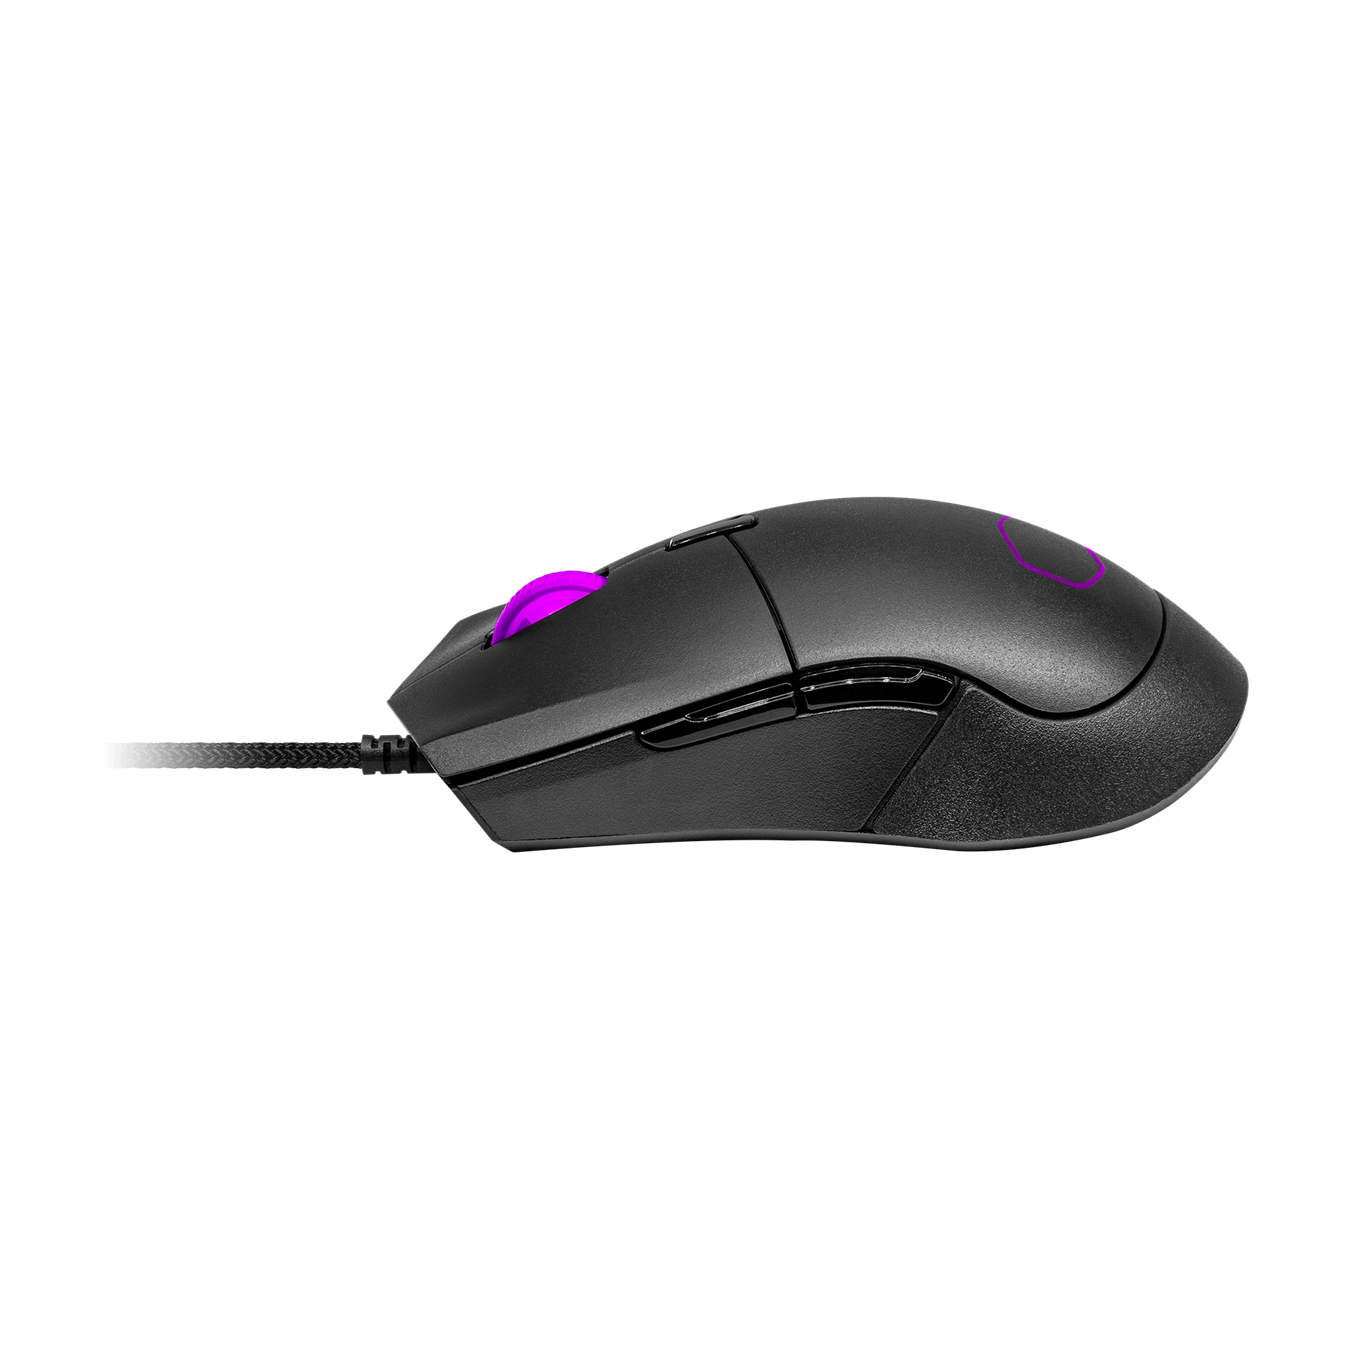 MM310 Gaming Mouse - New-and-improved feet made with PTFE material for low friction and high durability, which provides a smooth, fast glide with maximum responsiveness